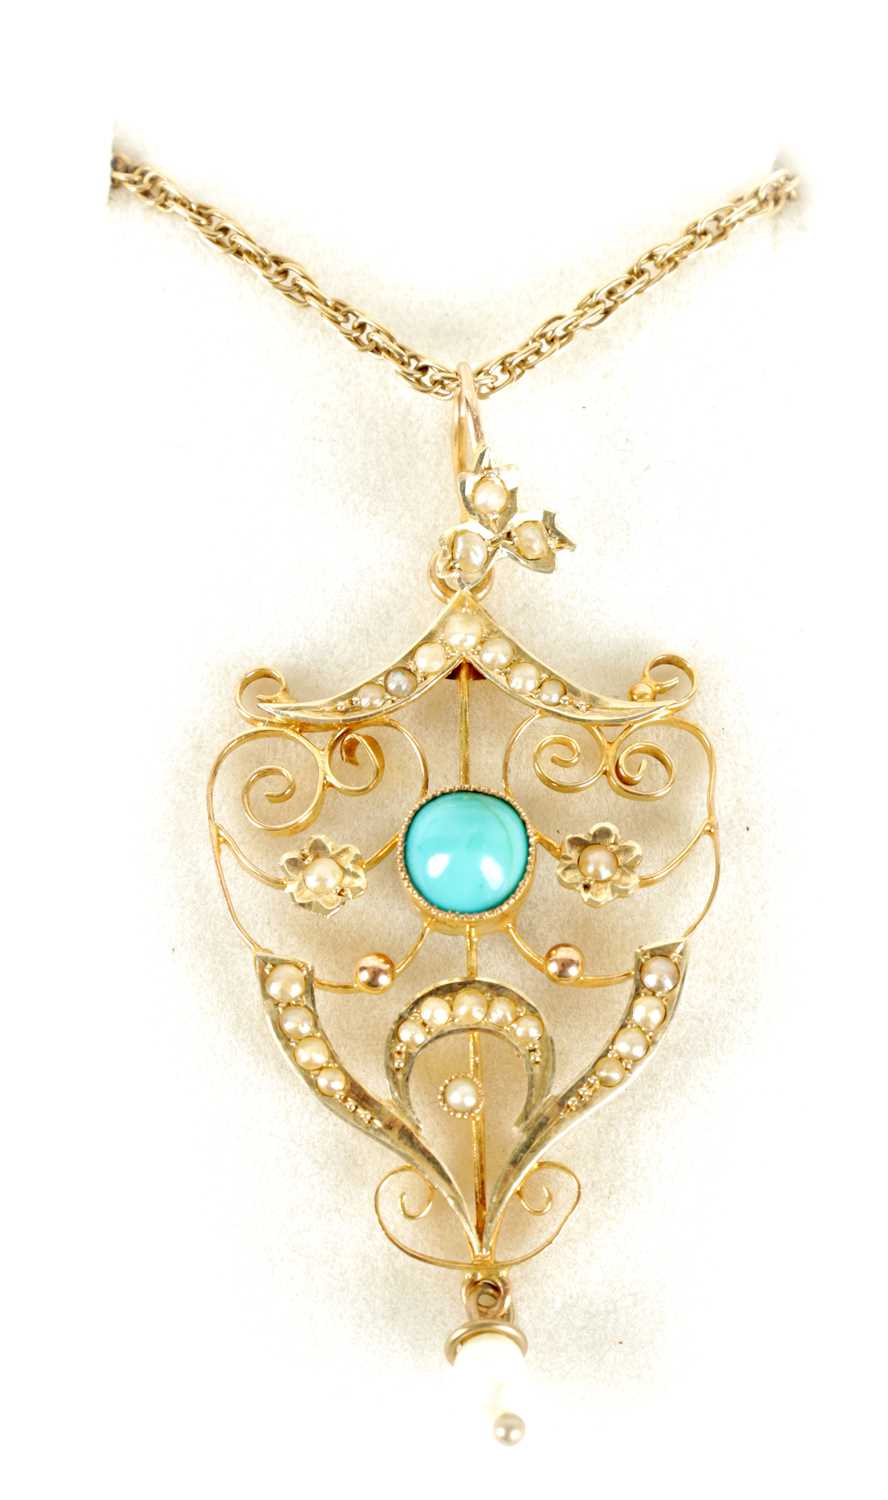 Lot 248 - A LADIES 9CT GOLD PEARL AND TURQUOISE PENDANT ON 9CT GOLD NECKLACE